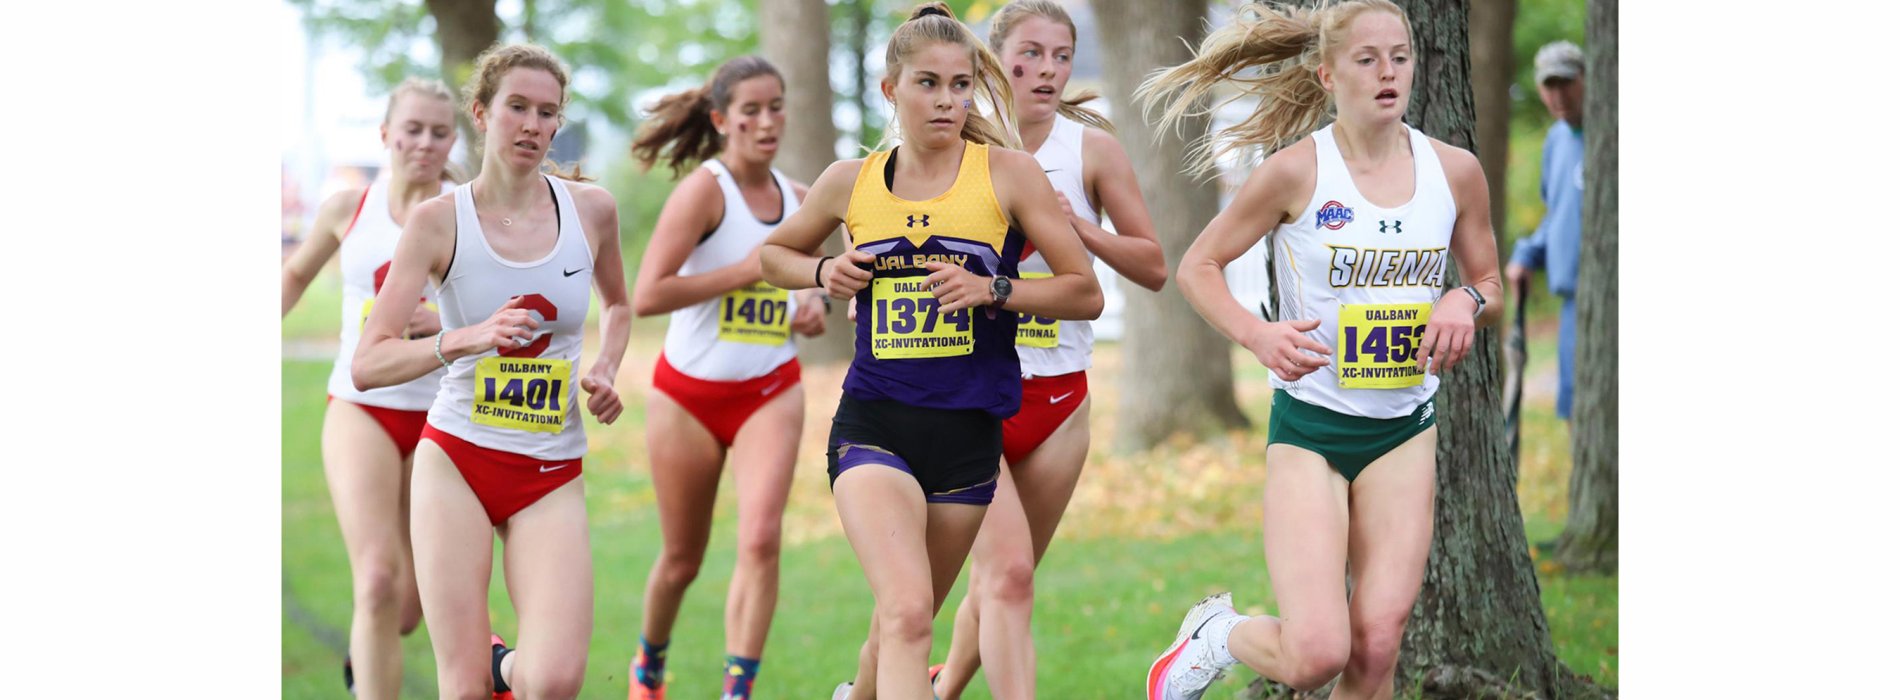 UAlbany women's cross country competes in an event.